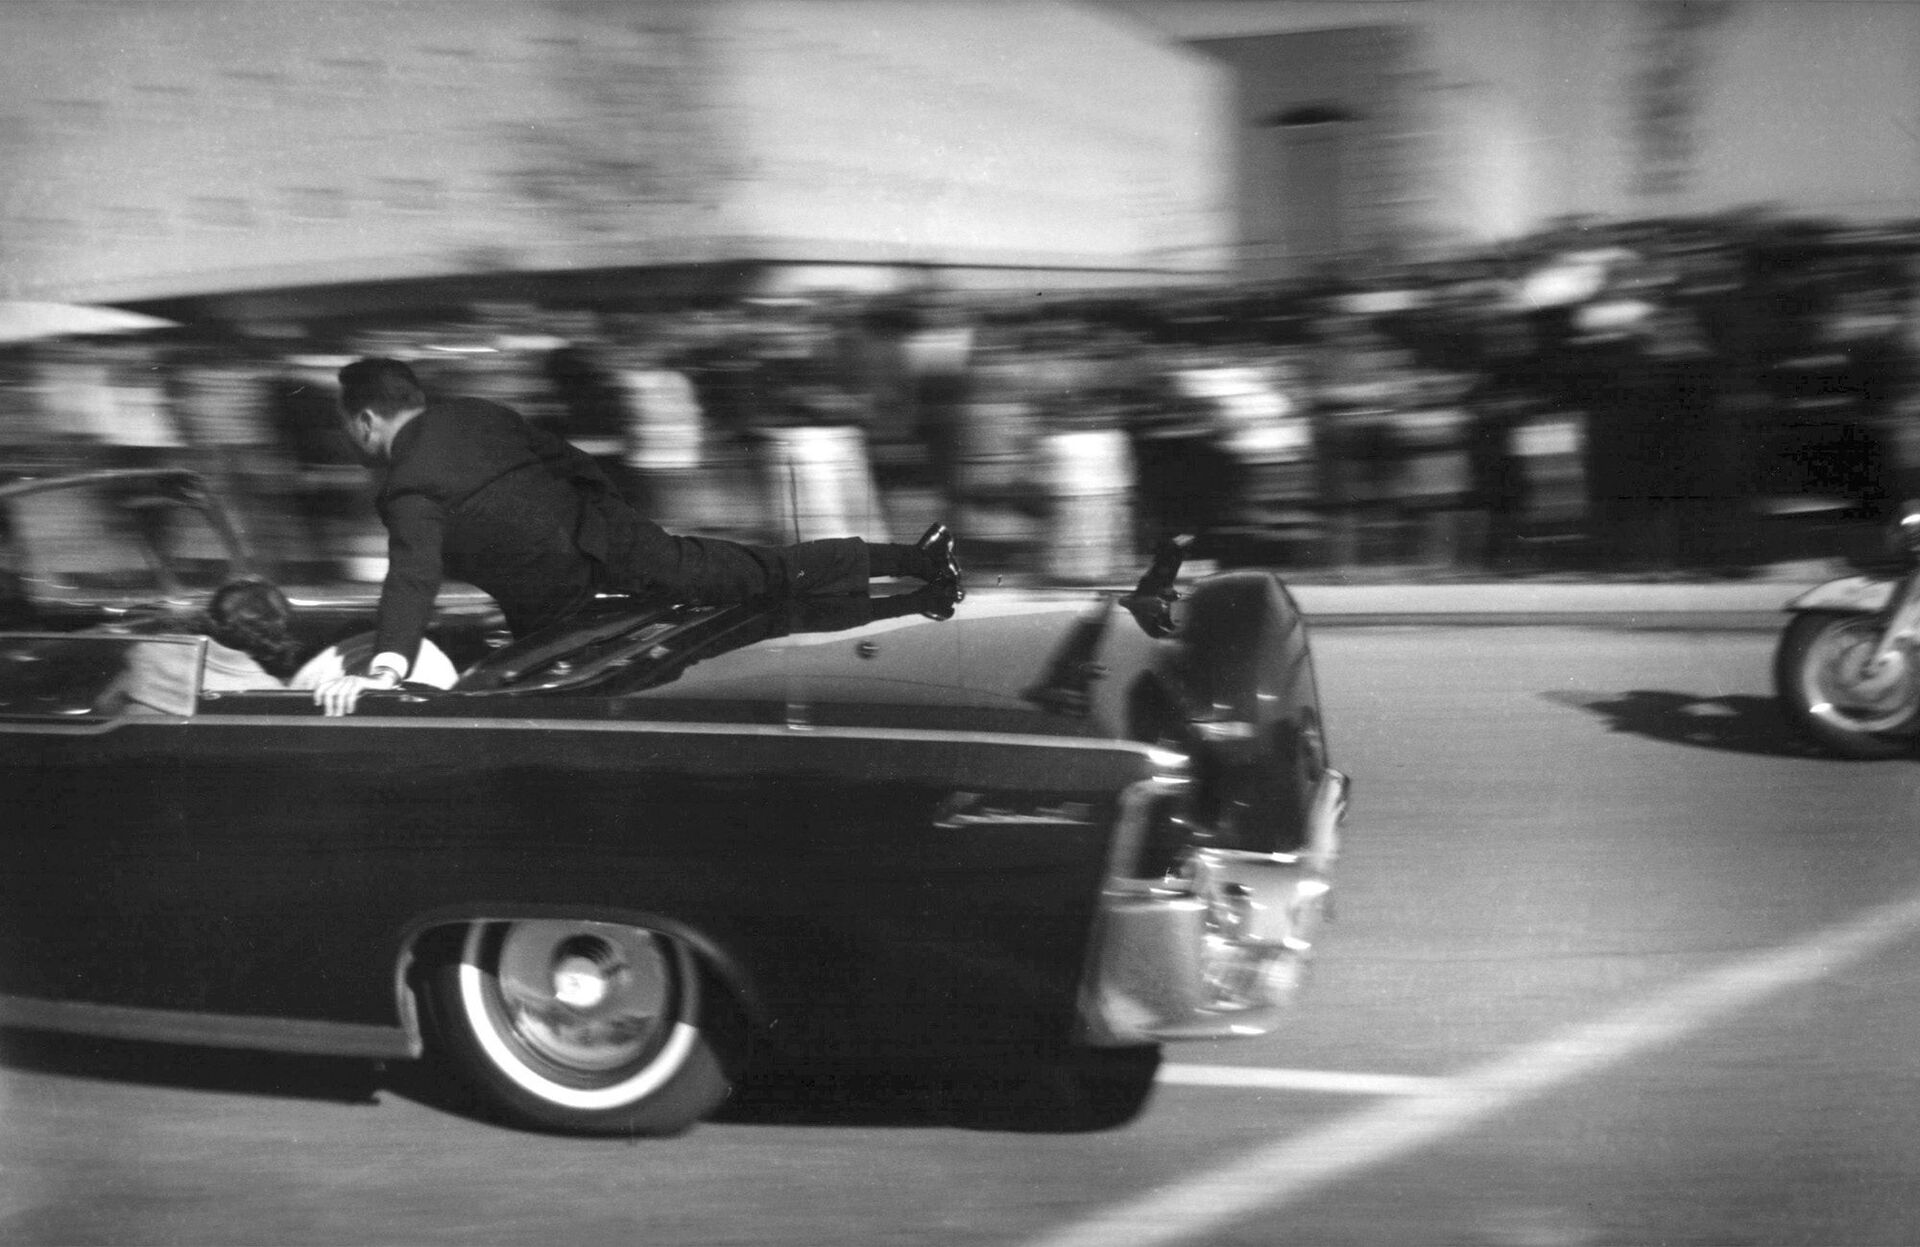 FILE - In this Nov. 22, 1963 file photo, the limousine carrying mortally wounded President John F. Kennedy races toward the hospital seconds after he was shot in Dallas. Secret Service agent Clinton Hill is riding on the back of the car, Nellie Connally, wife of Texas Gov. John Connally, bends over her wounded husband, and first lady Jacqueline Kennedy leans over the president. The National Archives has until Oct. 26, 2017, to disclose the remaining files related to Kennedy's assassination, unless President Donald Trump intervenes.  - Sputnik International, 1920, 12.09.2023